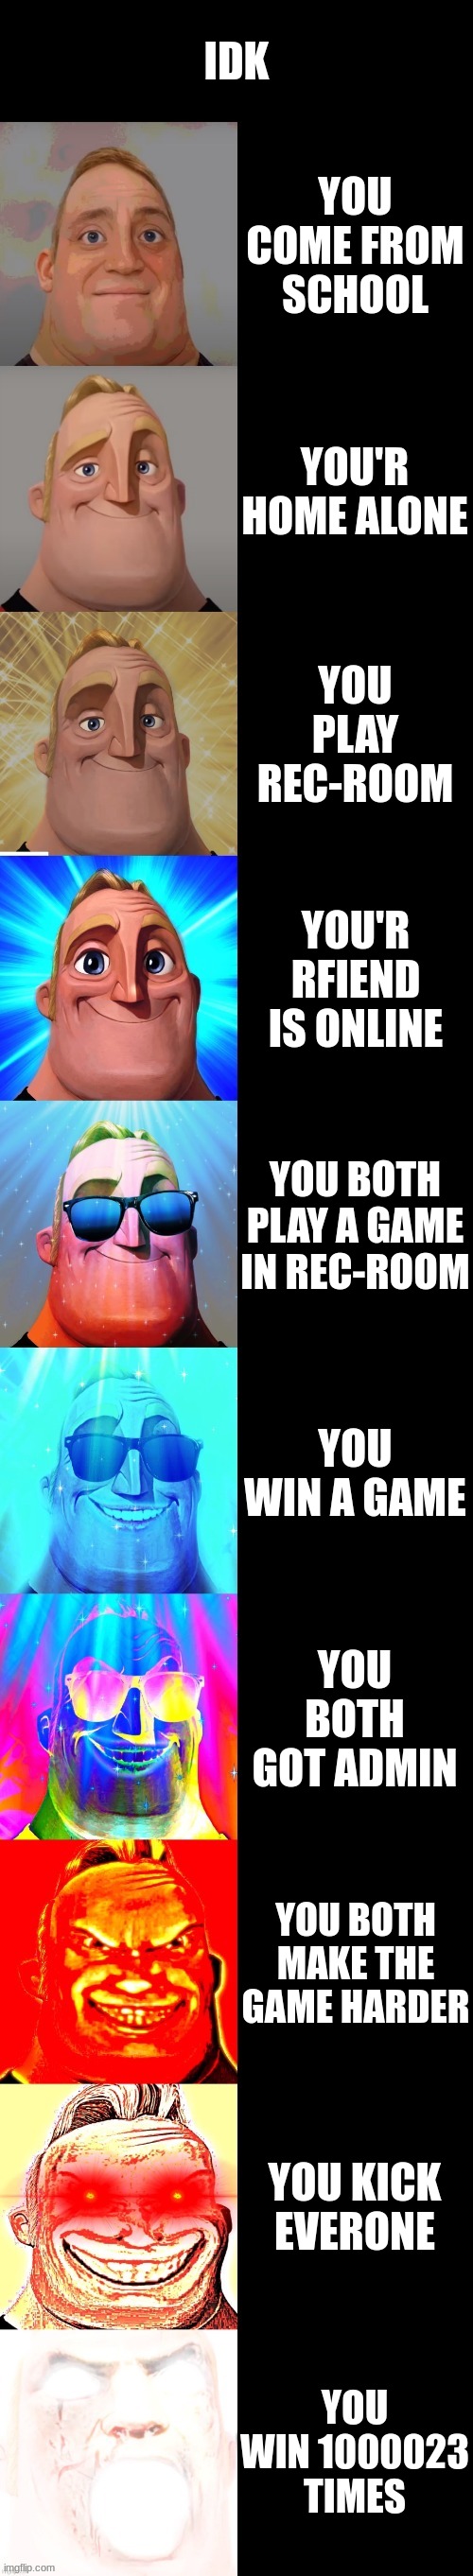 mr incredible becoming canny | IDK; YOU COME FROM SCHOOL; YOU'R HOME ALONE; YOU PLAY REC-ROOM; YOU'R RFIEND IS ONLINE; YOU BOTH PLAY A GAME IN REC-ROOM; YOU WIN A GAME; YOU BOTH GOT ADMIN; YOU BOTH MAKE THE GAME HARDER; YOU KICK EVERONE; YOU WIN 1000023 TIMES | image tagged in mr incredible becoming canny | made w/ Imgflip meme maker